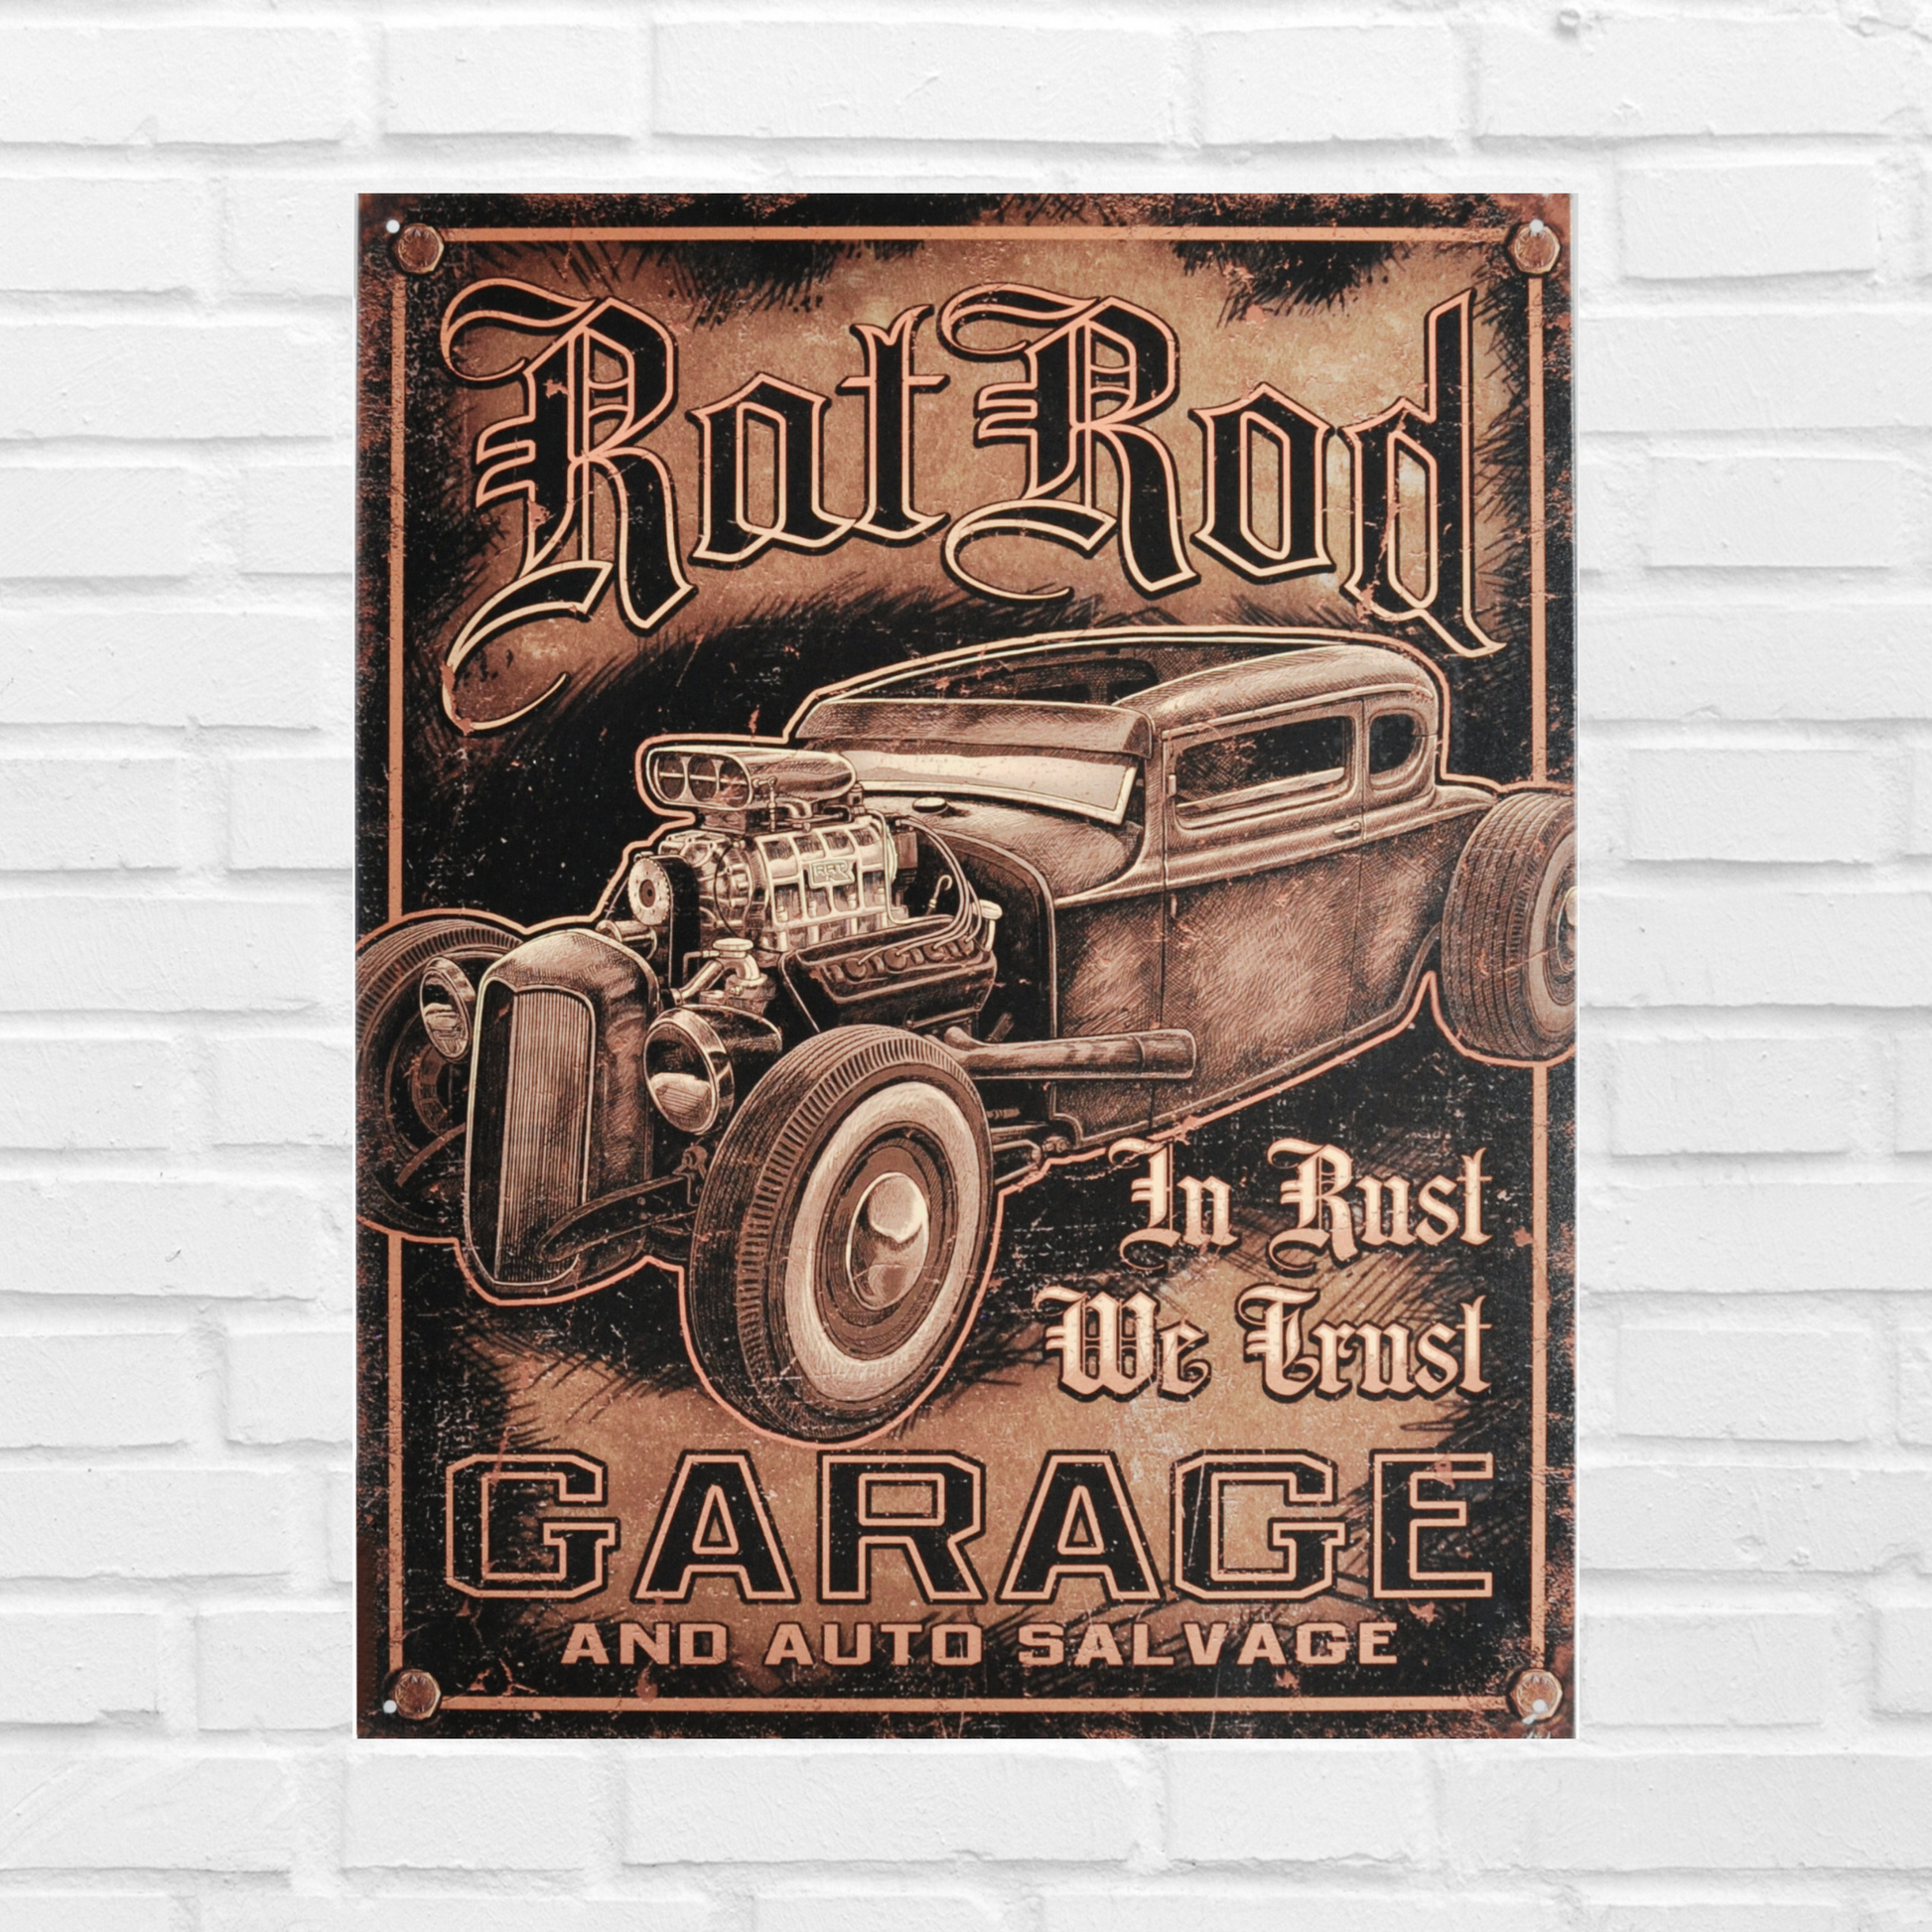 Vintage Poster Hot Rod Garage Vintage Print that Says, "Hot Rod, in Rust We Trust, Garage and auto salvage" in a rusty print finish.